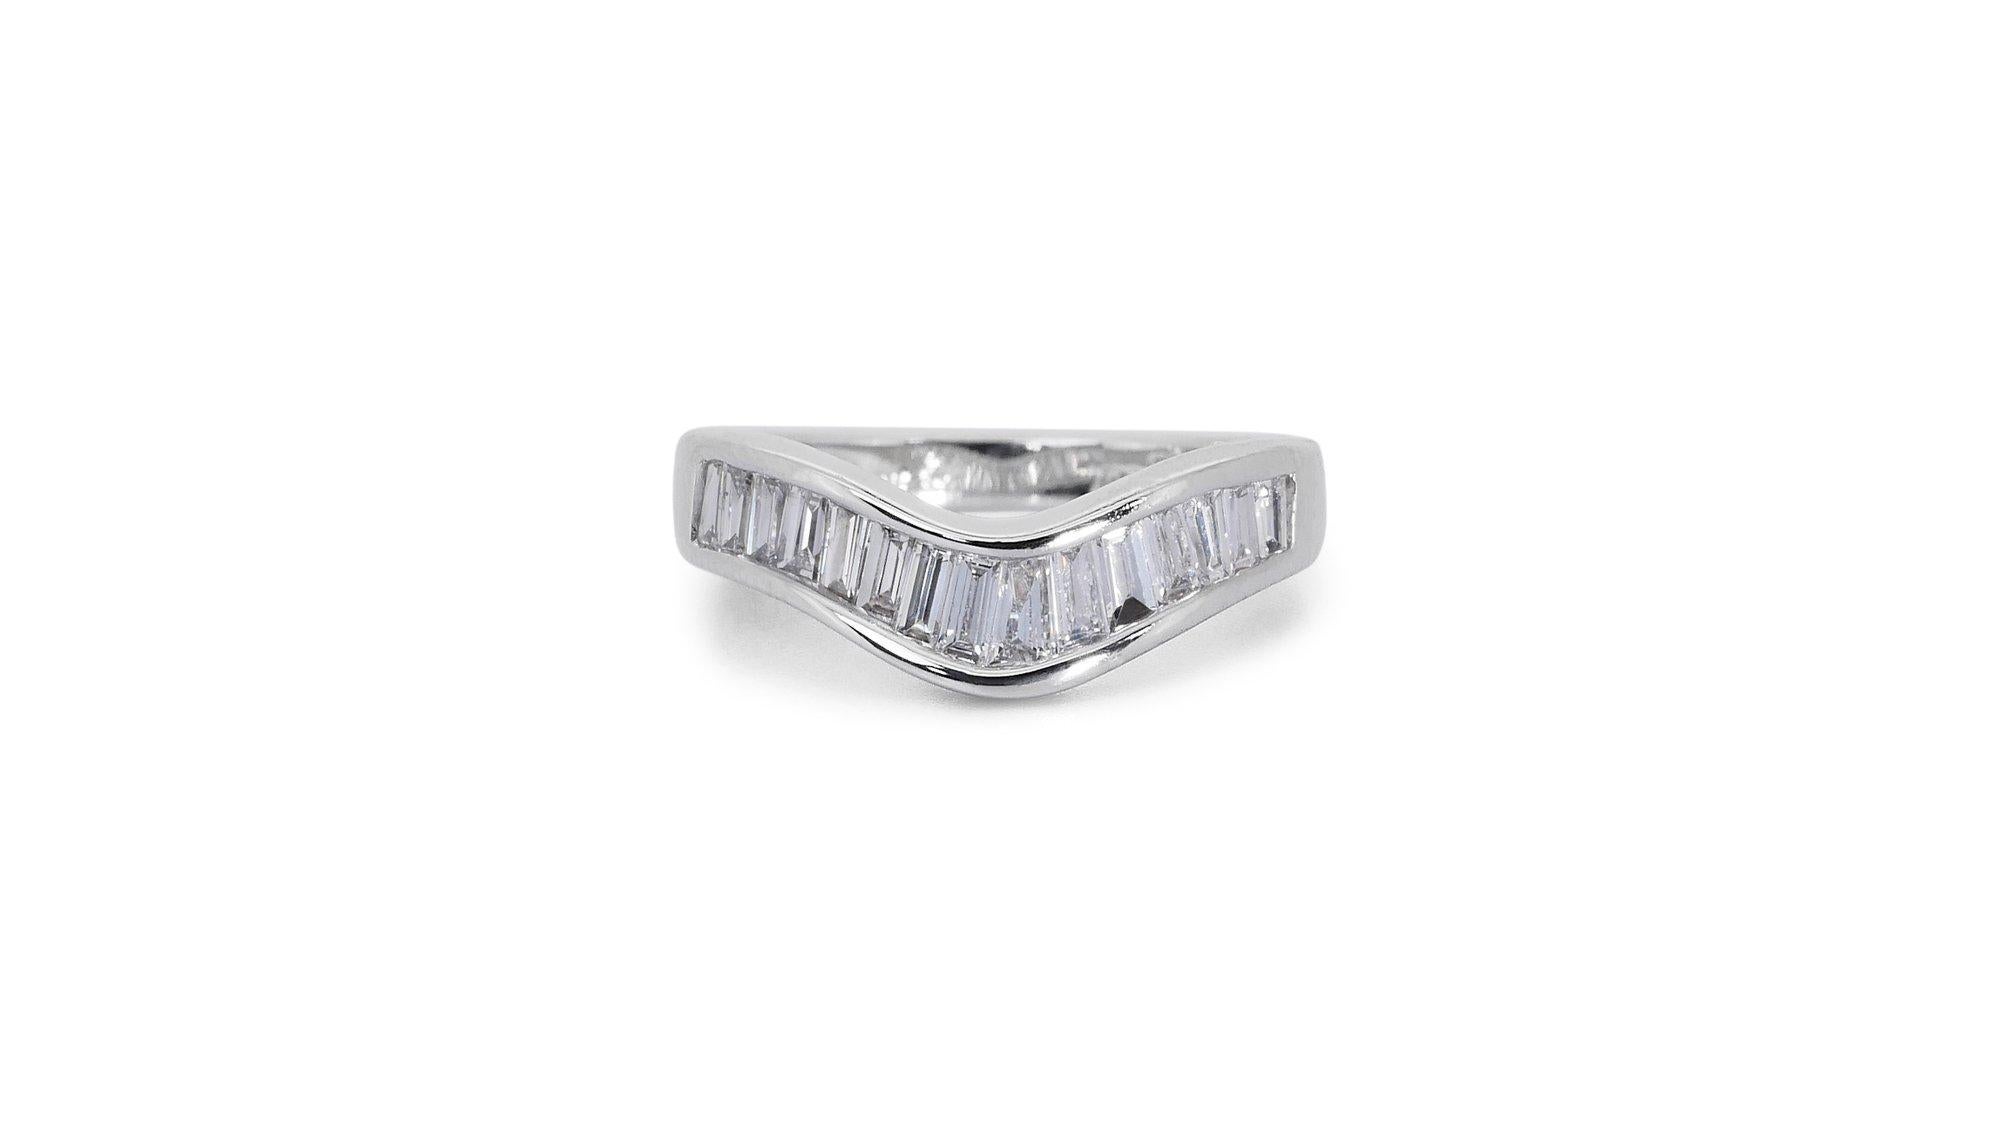 Ravishing 18k White Gold Pave Stack Ring w/ 1.2 ct Natural Diamonds IGI Cert In Excellent Condition For Sale In רמת גן, IL